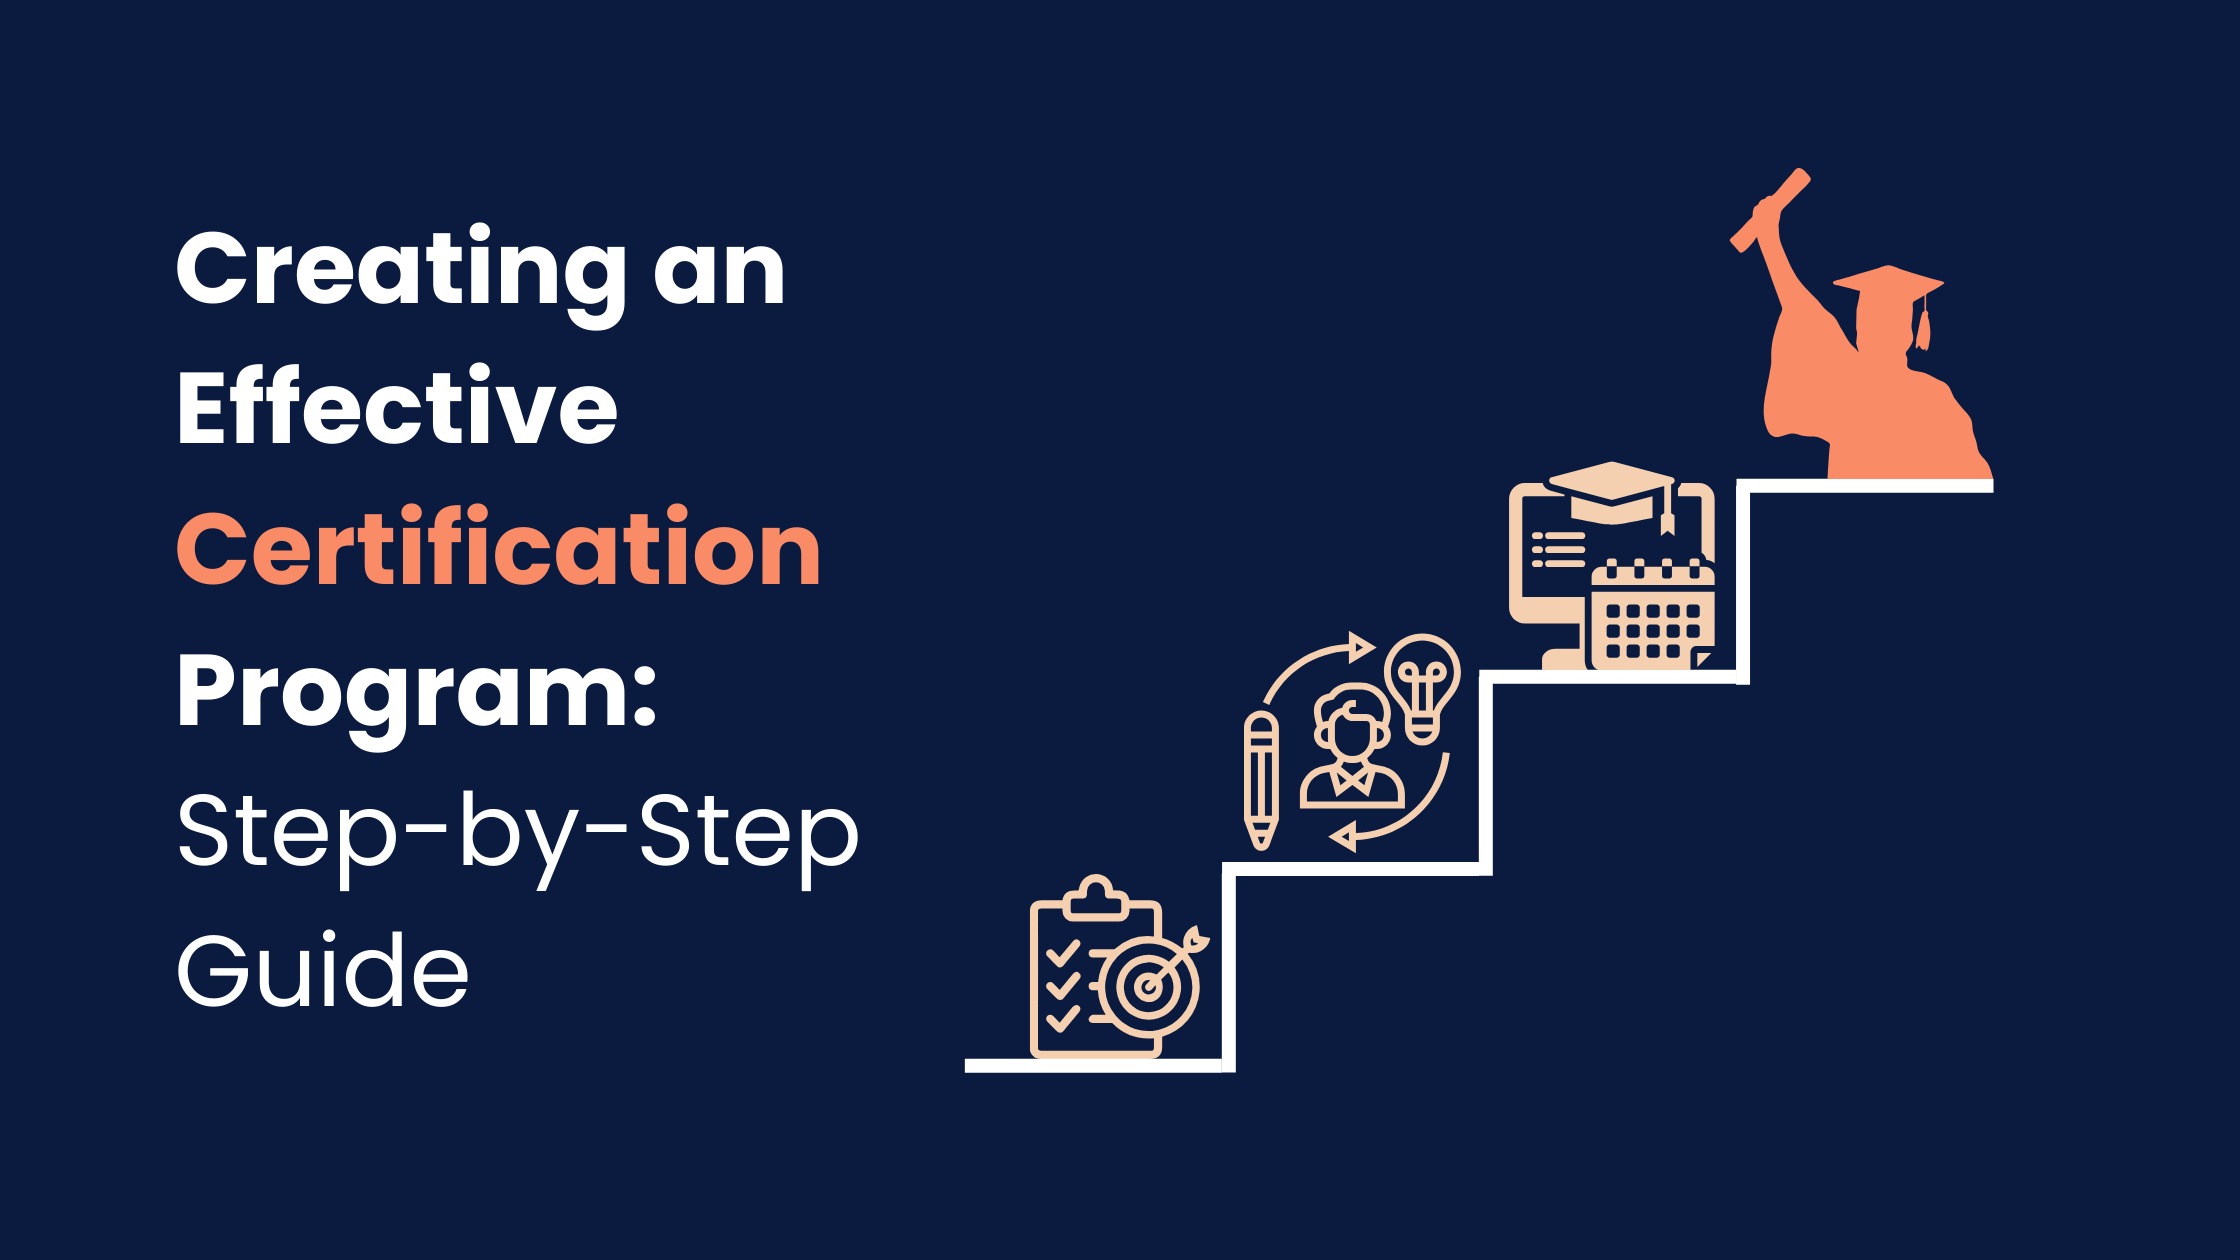 Creating an Effective Certification Program: Step-by-Step Guide